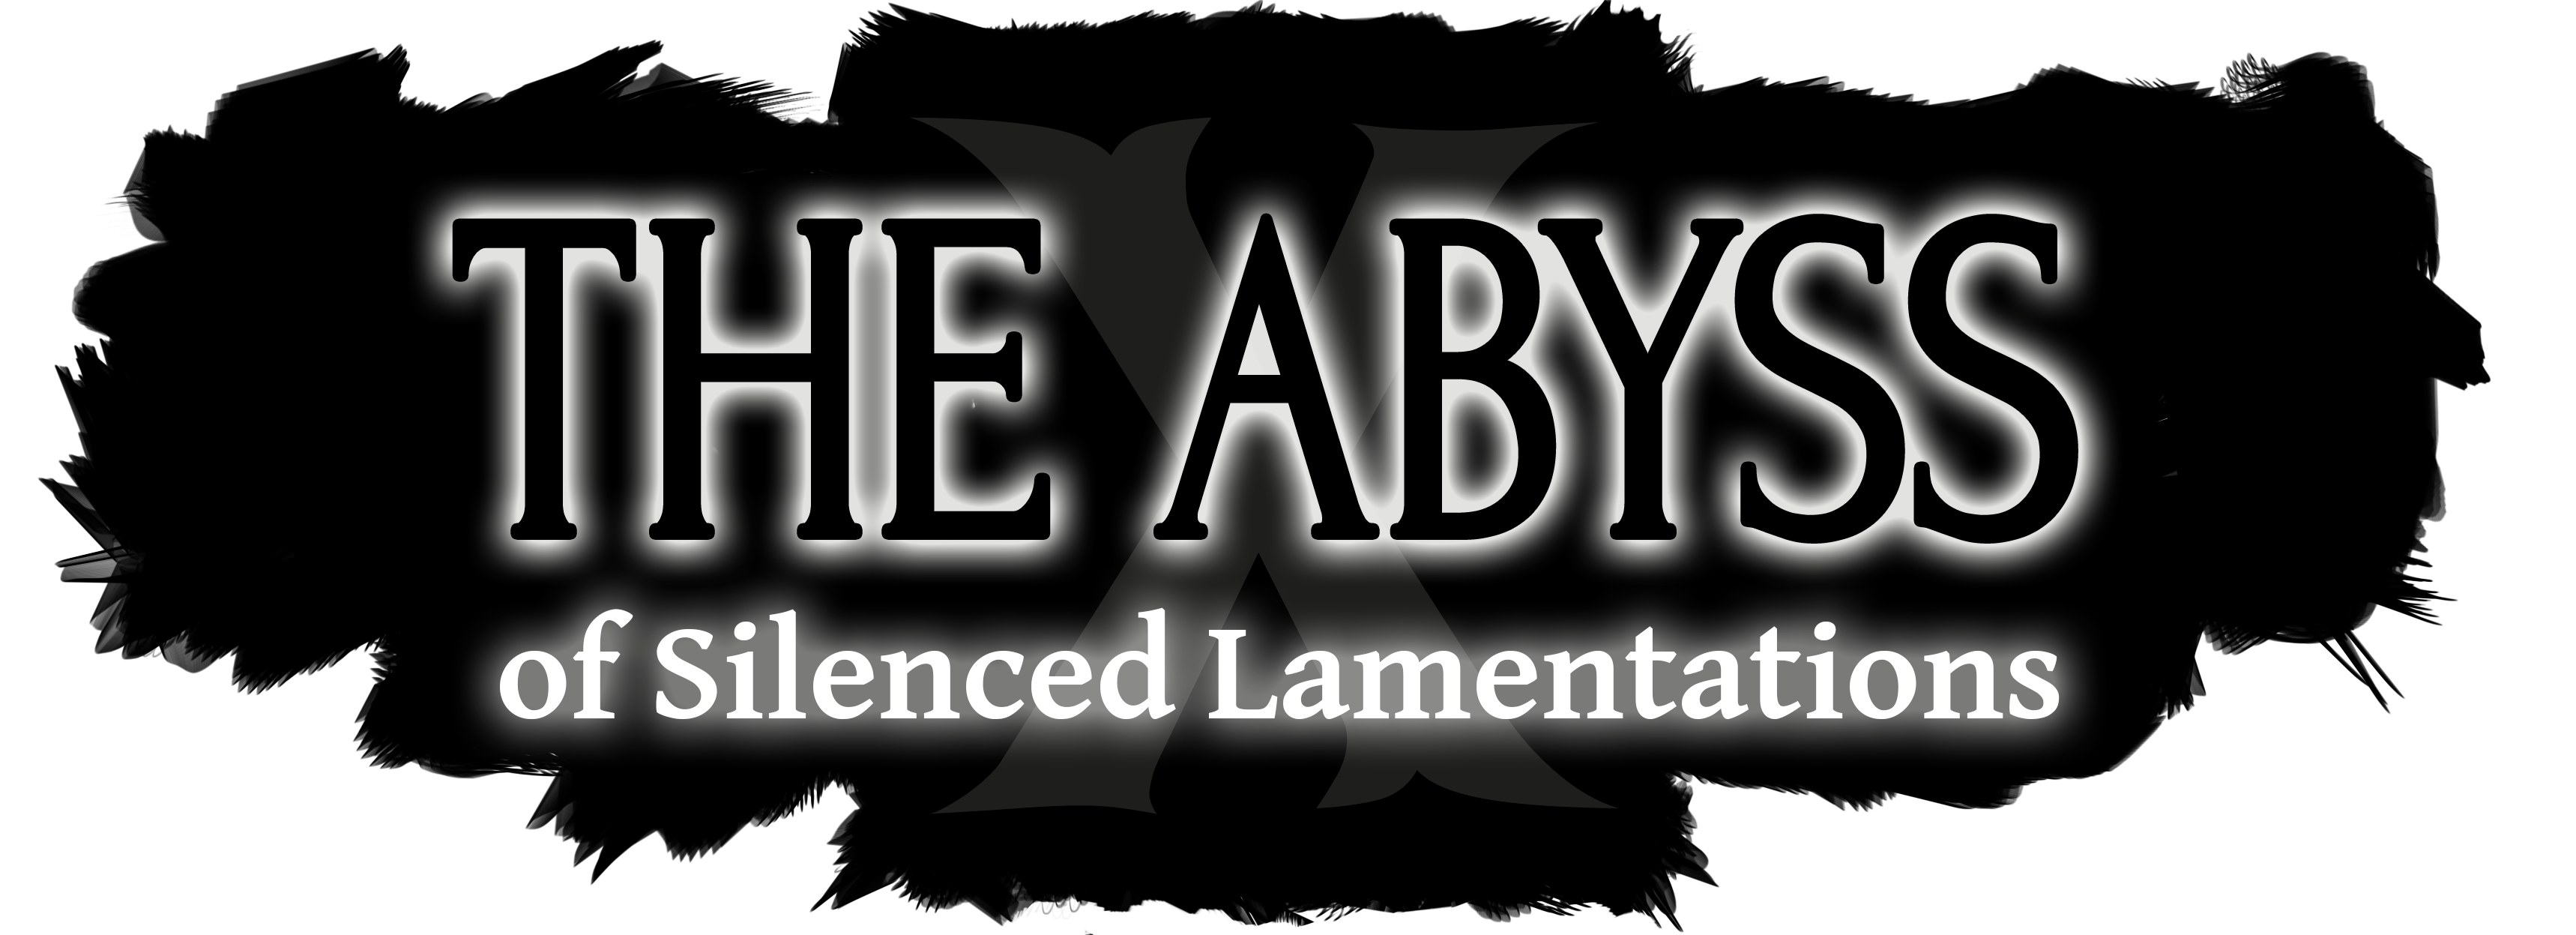 The Abyss of Silenced Lamentations